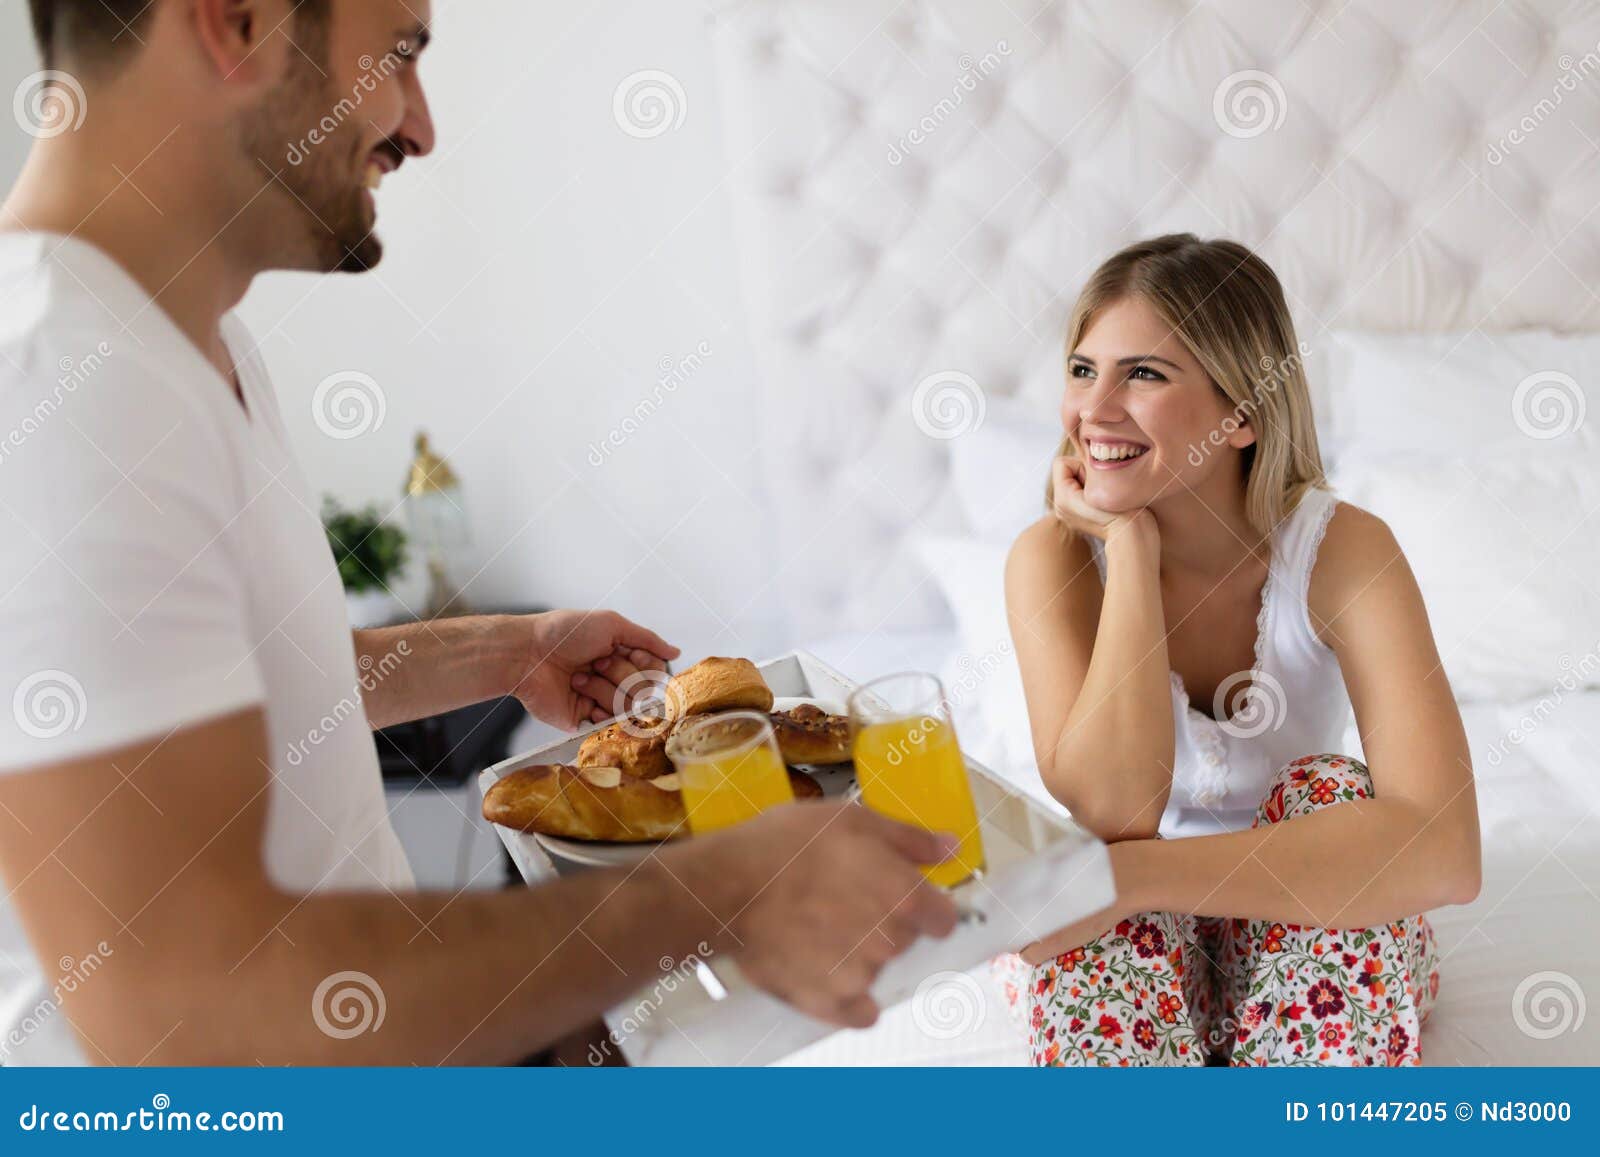 Romantic Husband Waking Wife with Breakfast in Bed Stock Image - Image ...